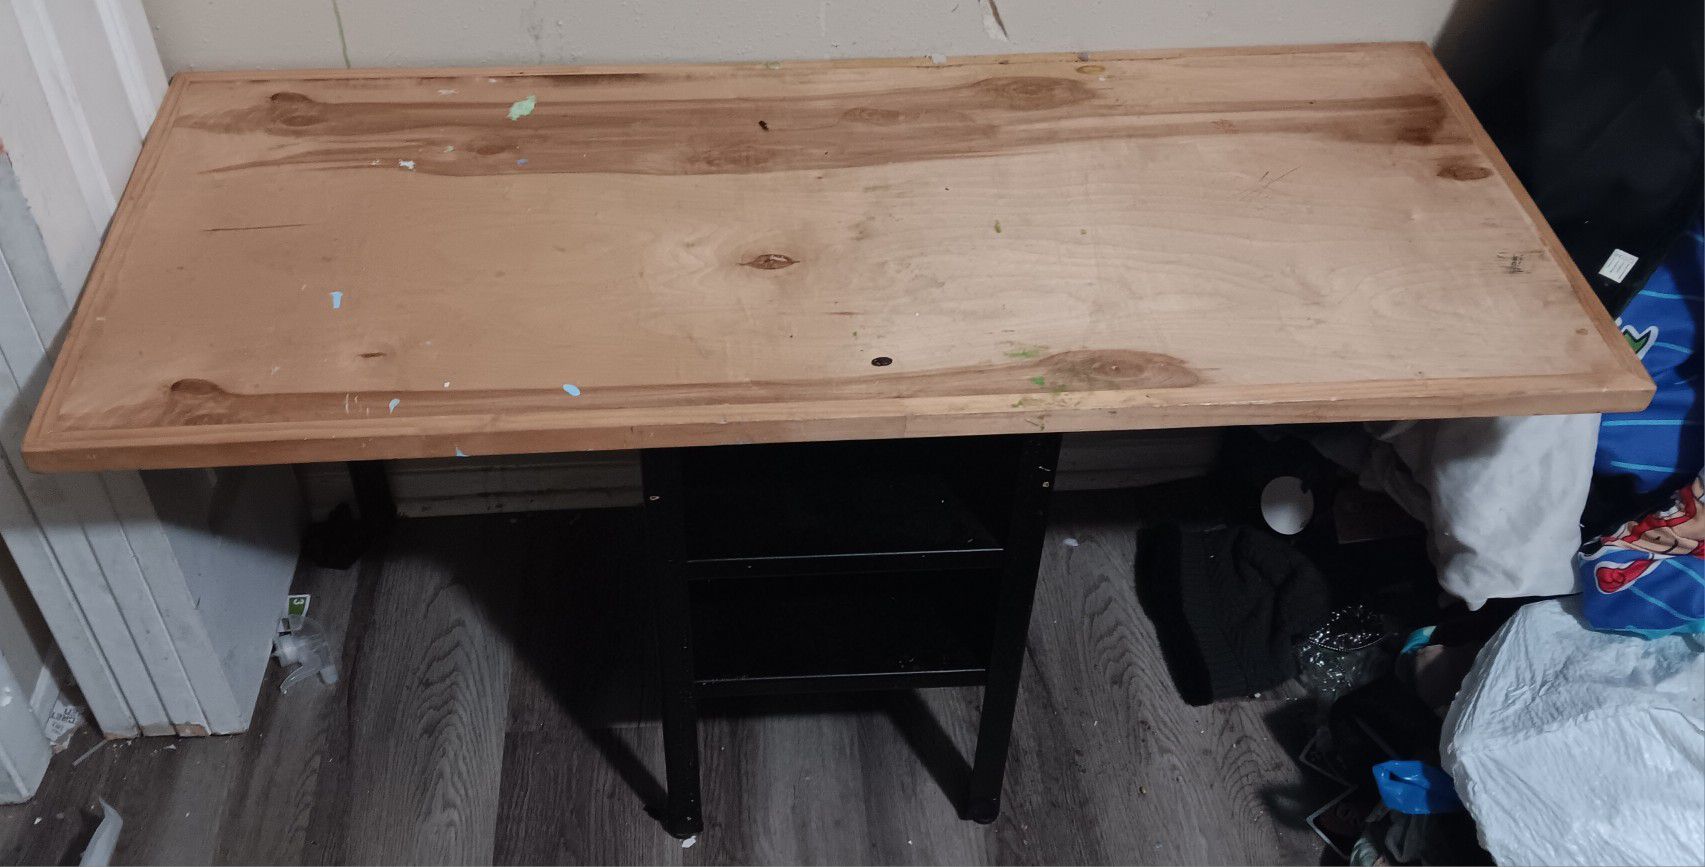 Kids Desk Used But Like New I Will Clean It